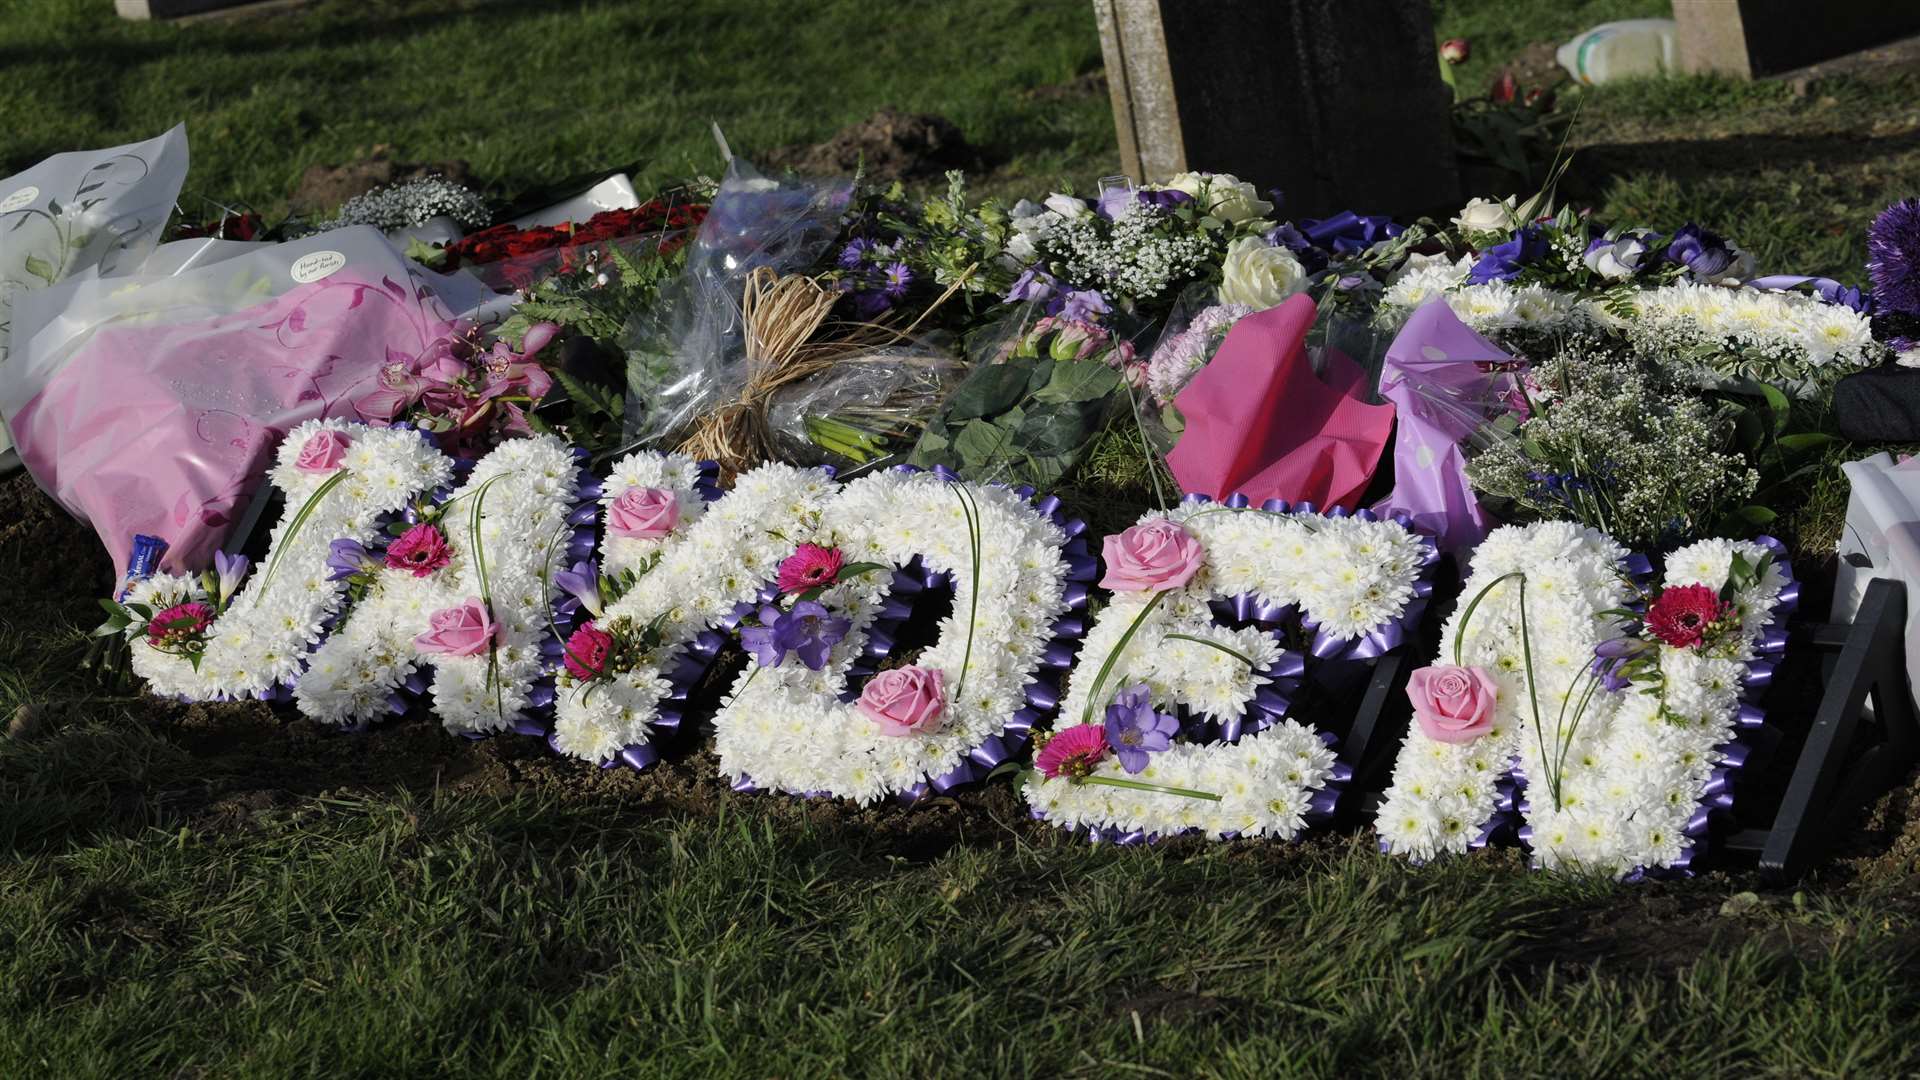 Flowers placed at the grave of Jayden Parkinson at St Martin's Church in Cheriton